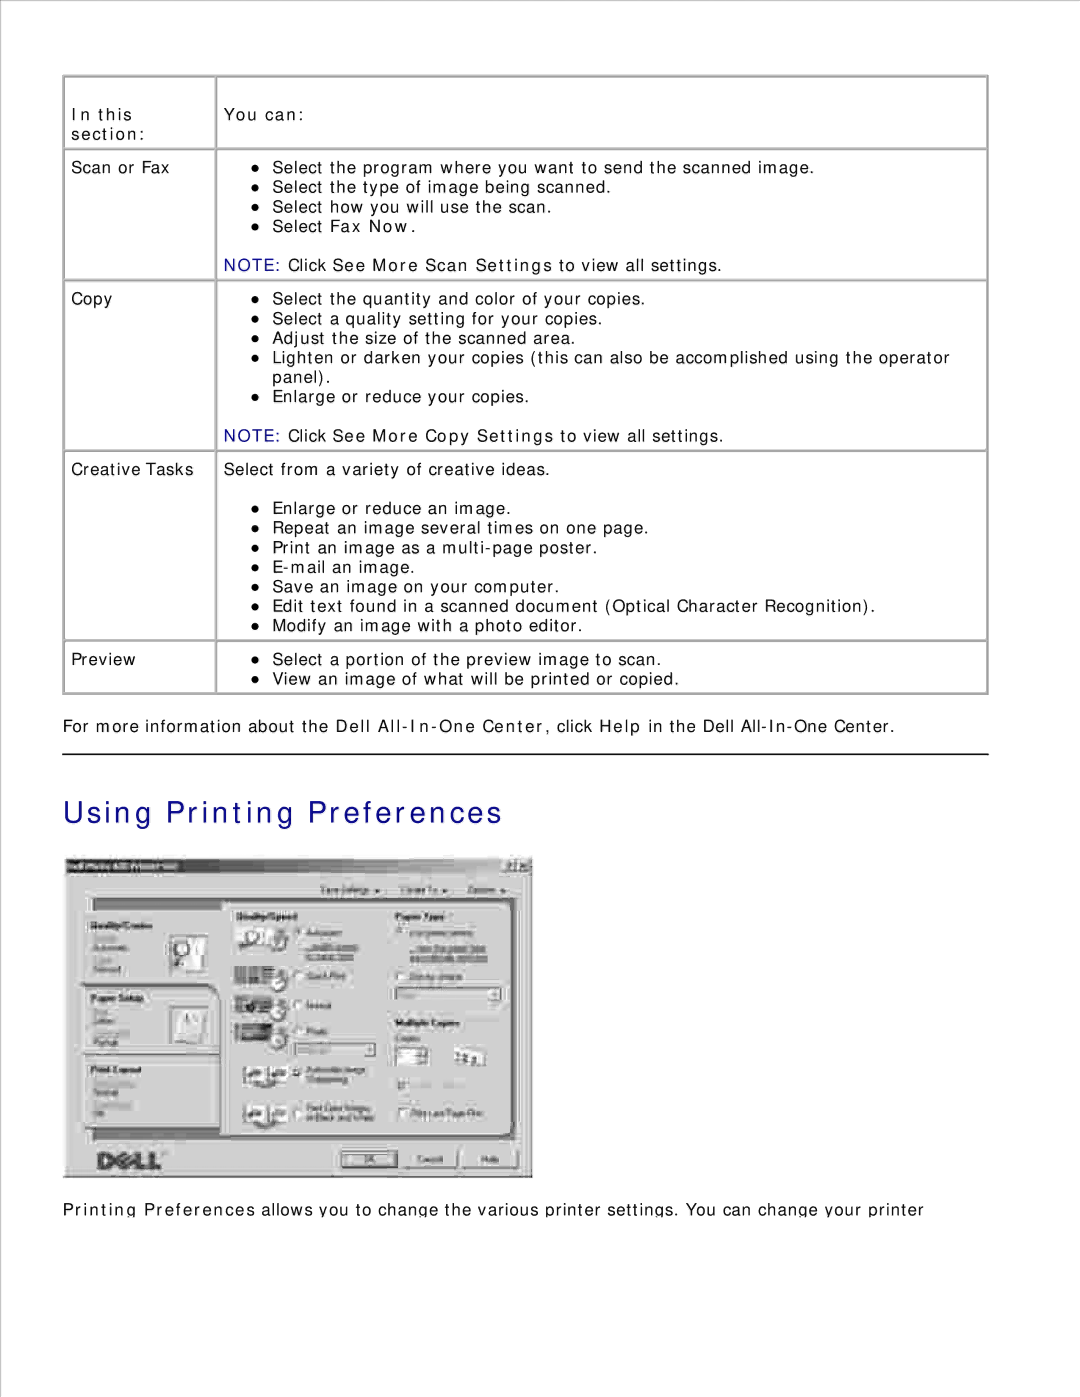 Dell 942 manual Using Printing Preferences, This Section, You can, Select Fax Now 